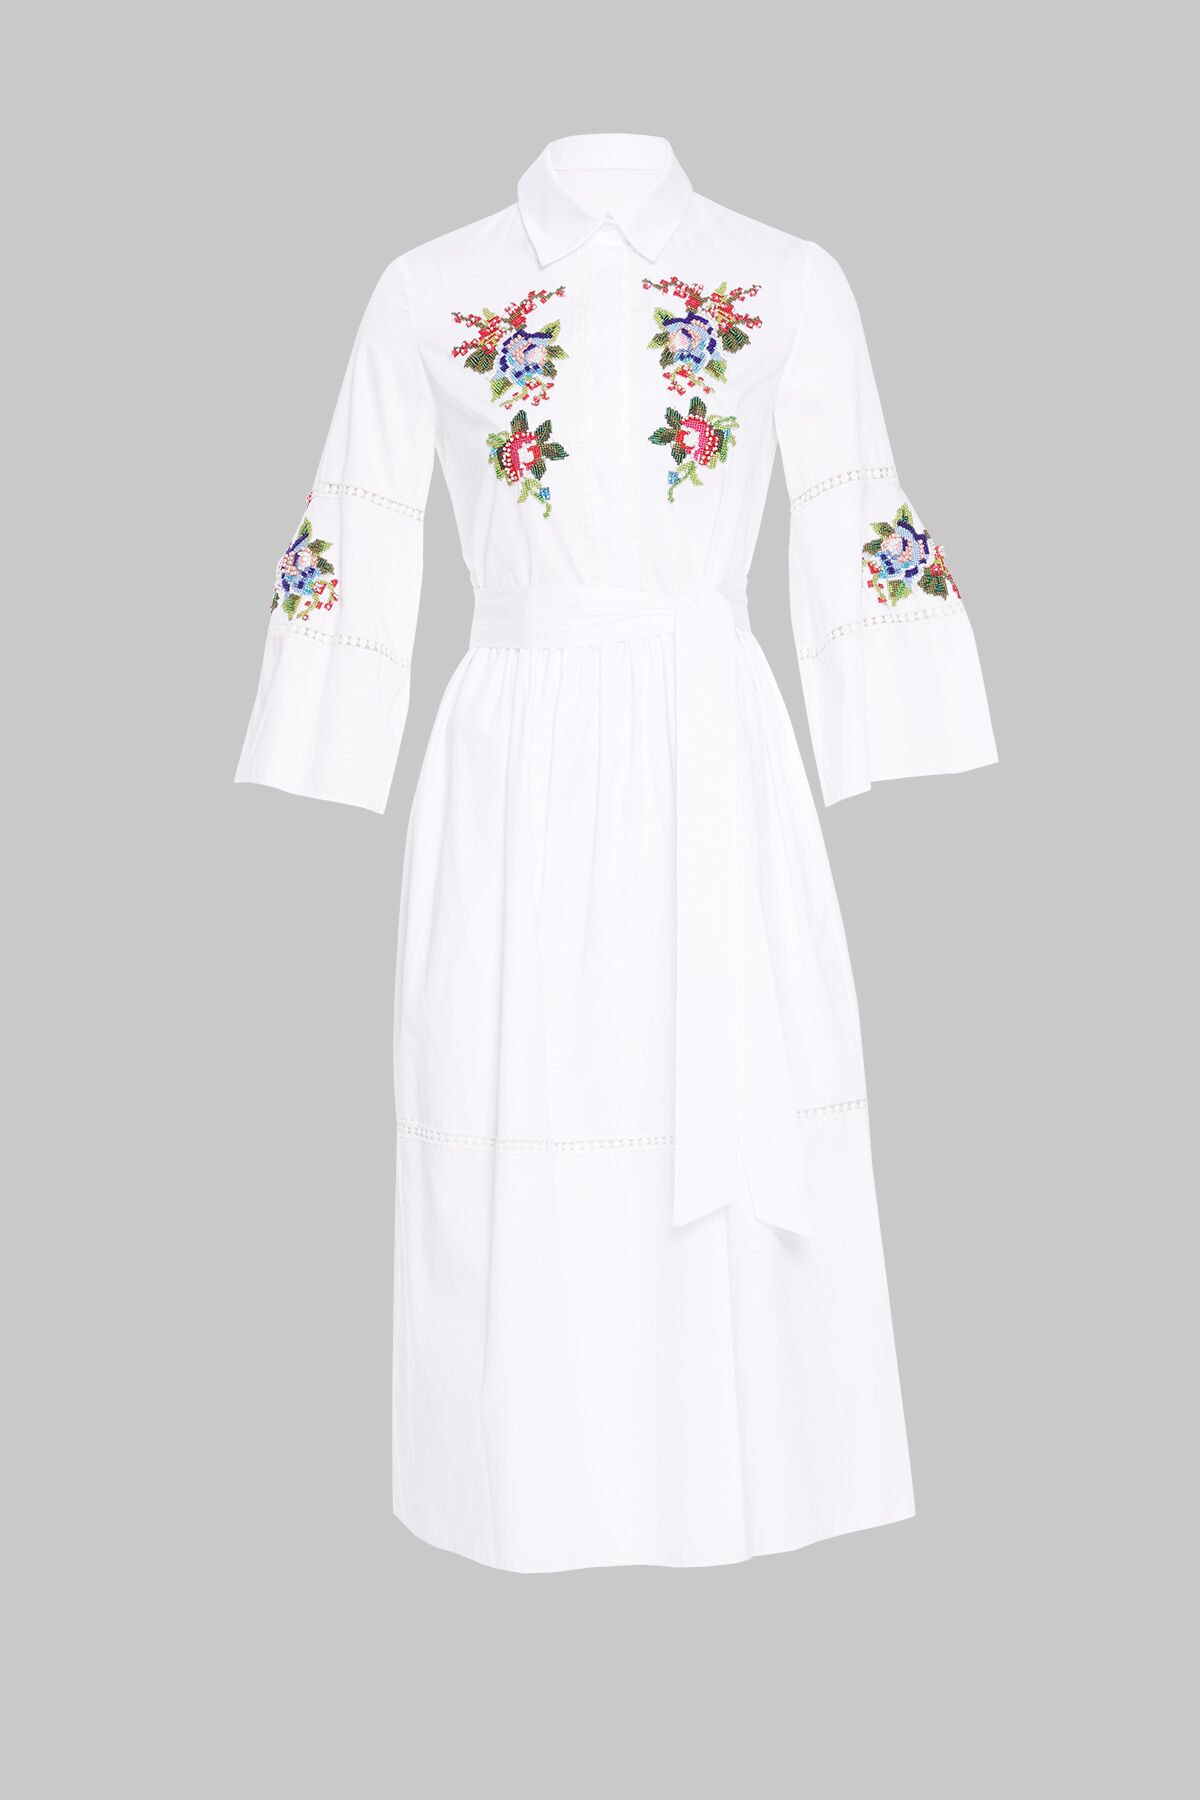  GIZIA - Embroidered Detailed Long White Dress